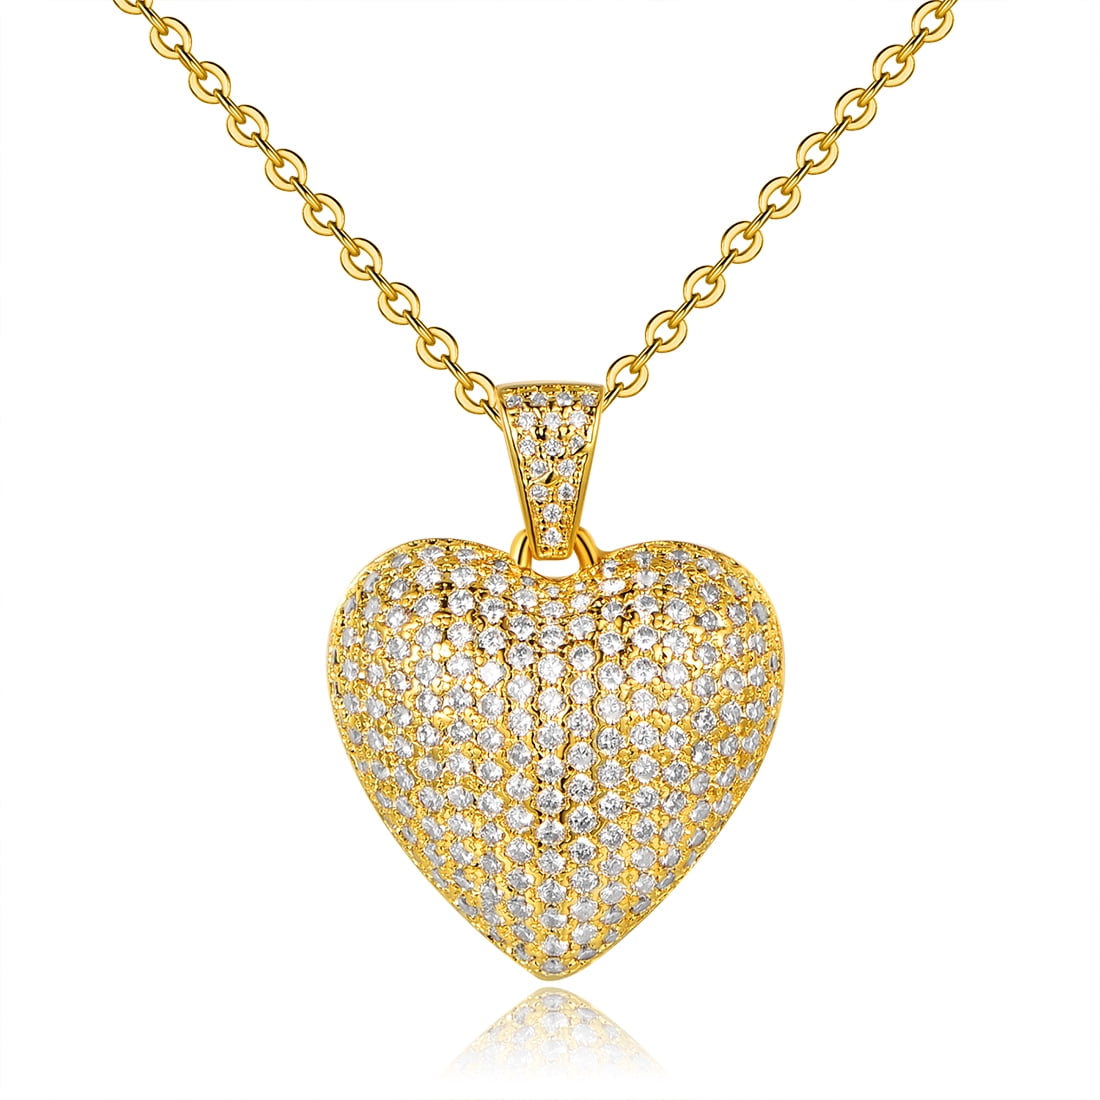 Daesar Gold Plated Womens Heart Necklace Rhinestone CZ Pendant Necklace for Women 